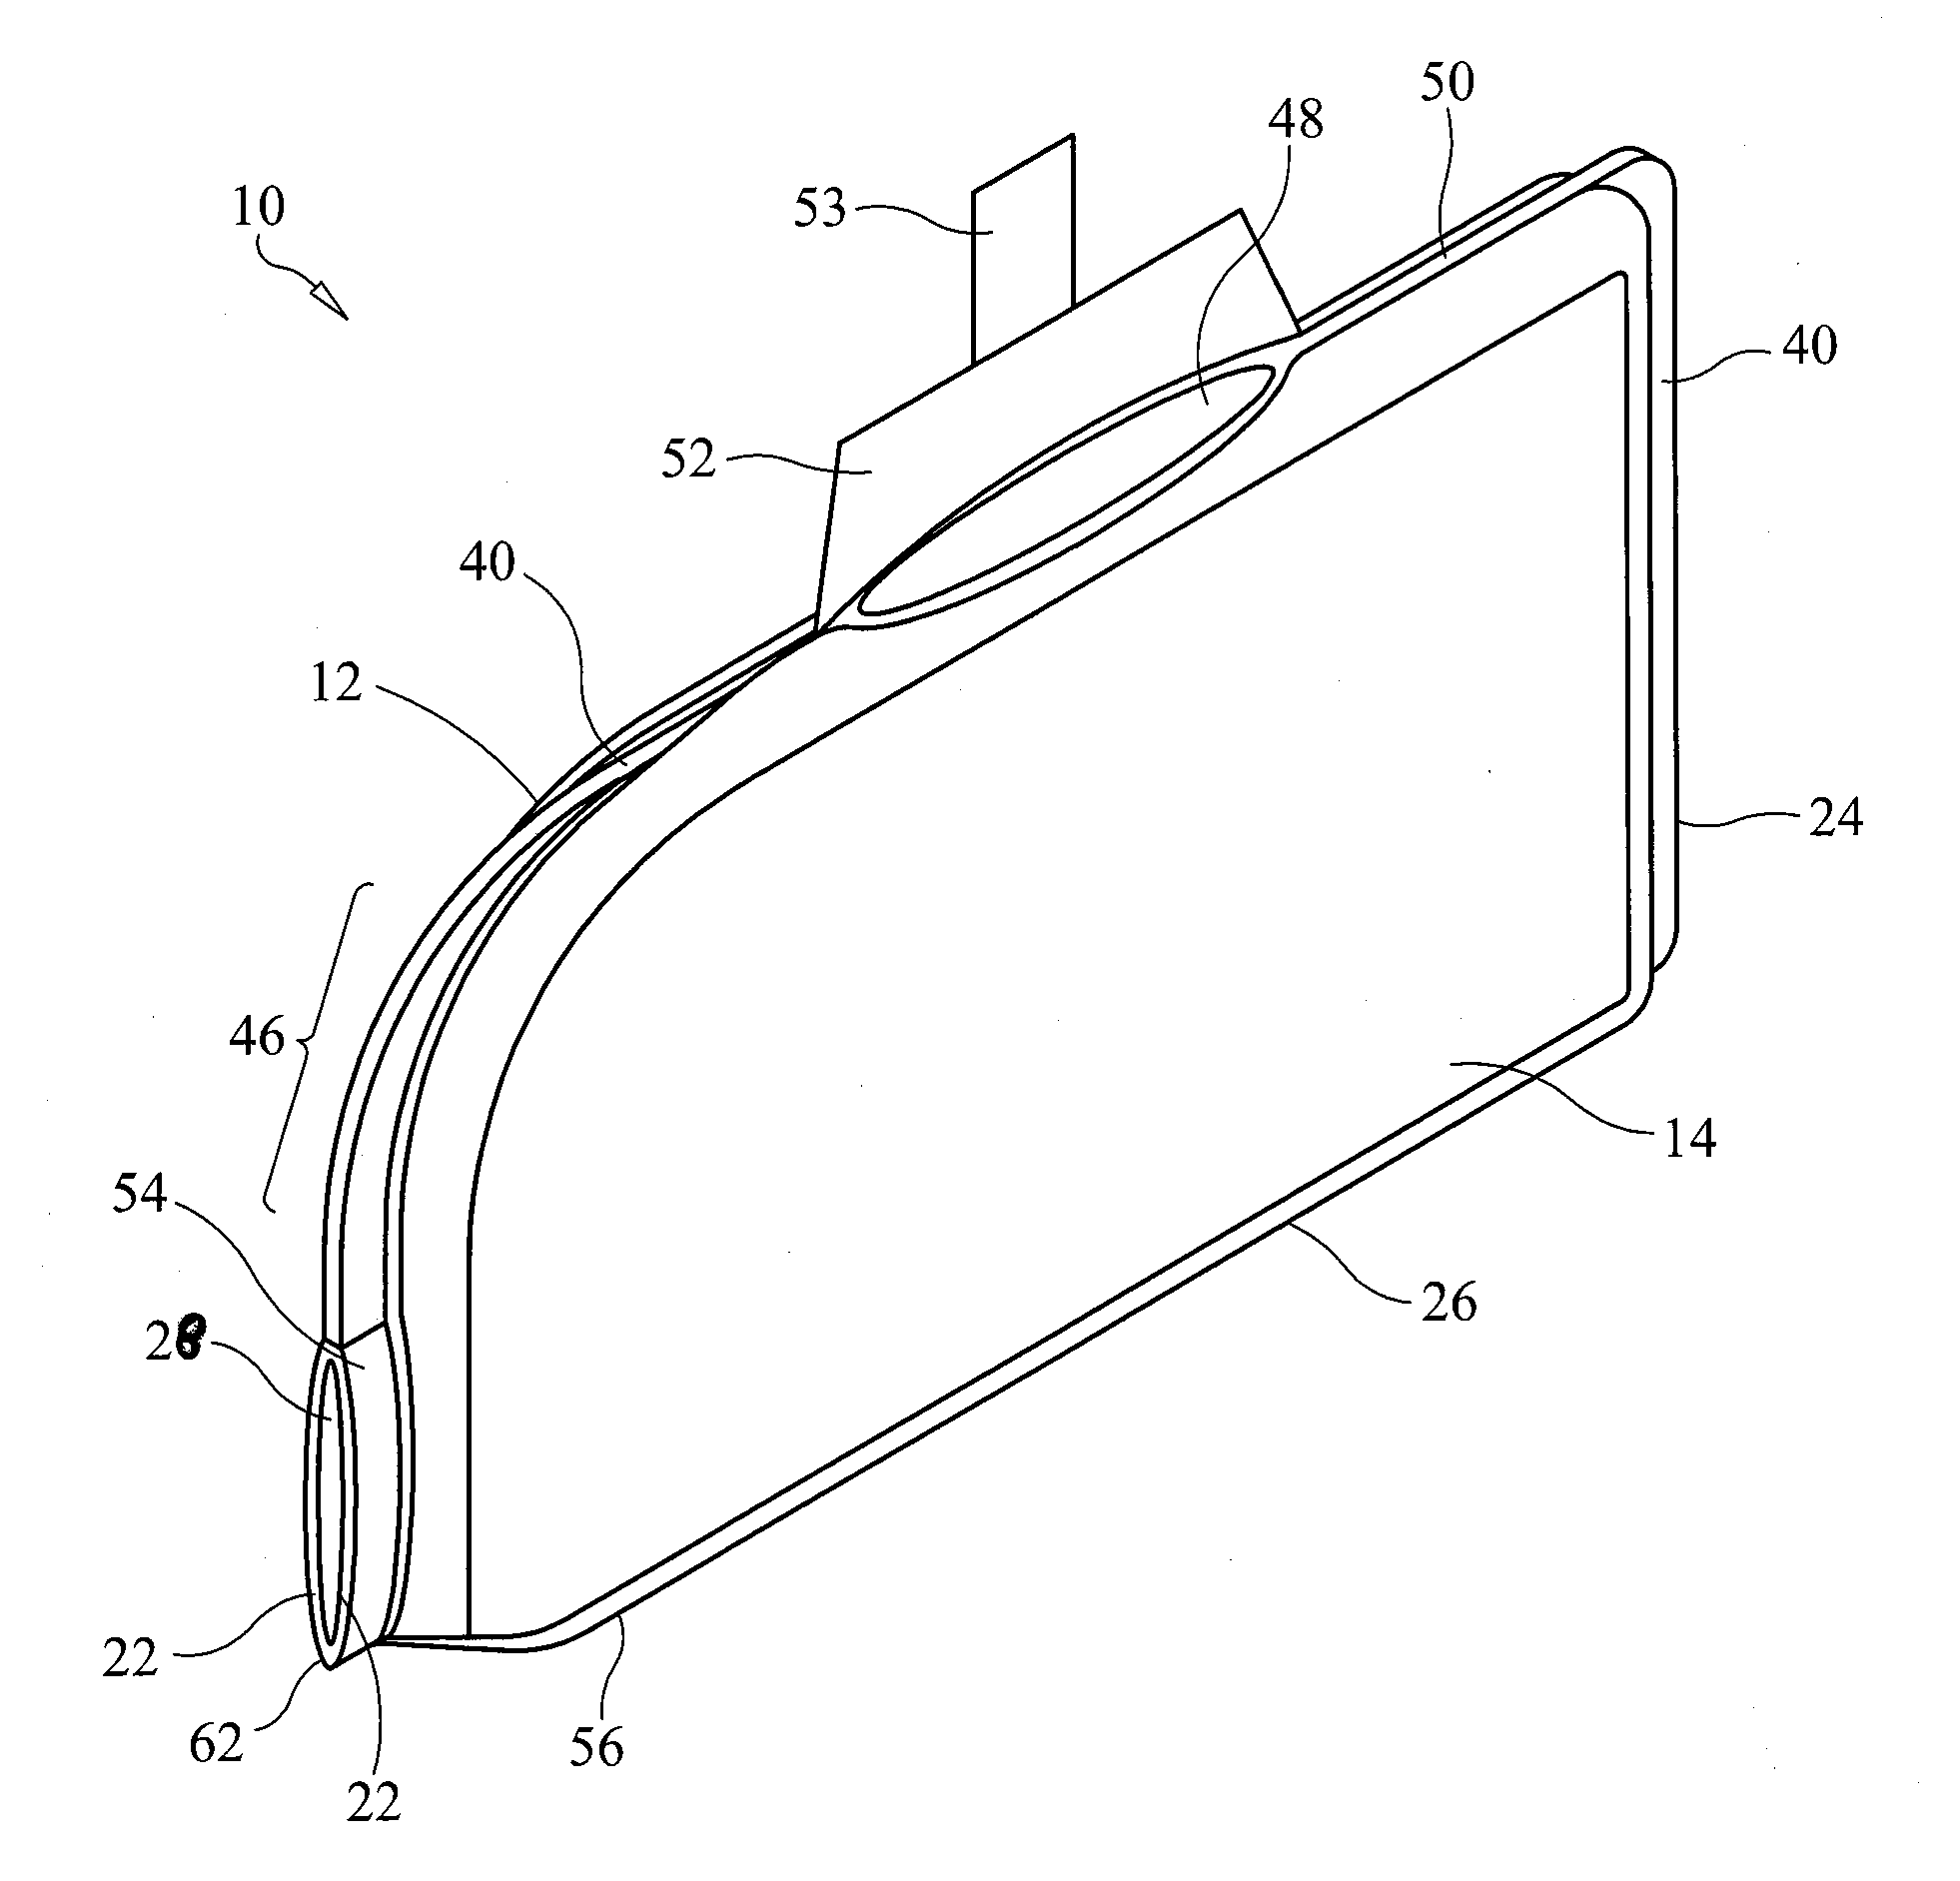 Incontinence device for non-ambulatory males